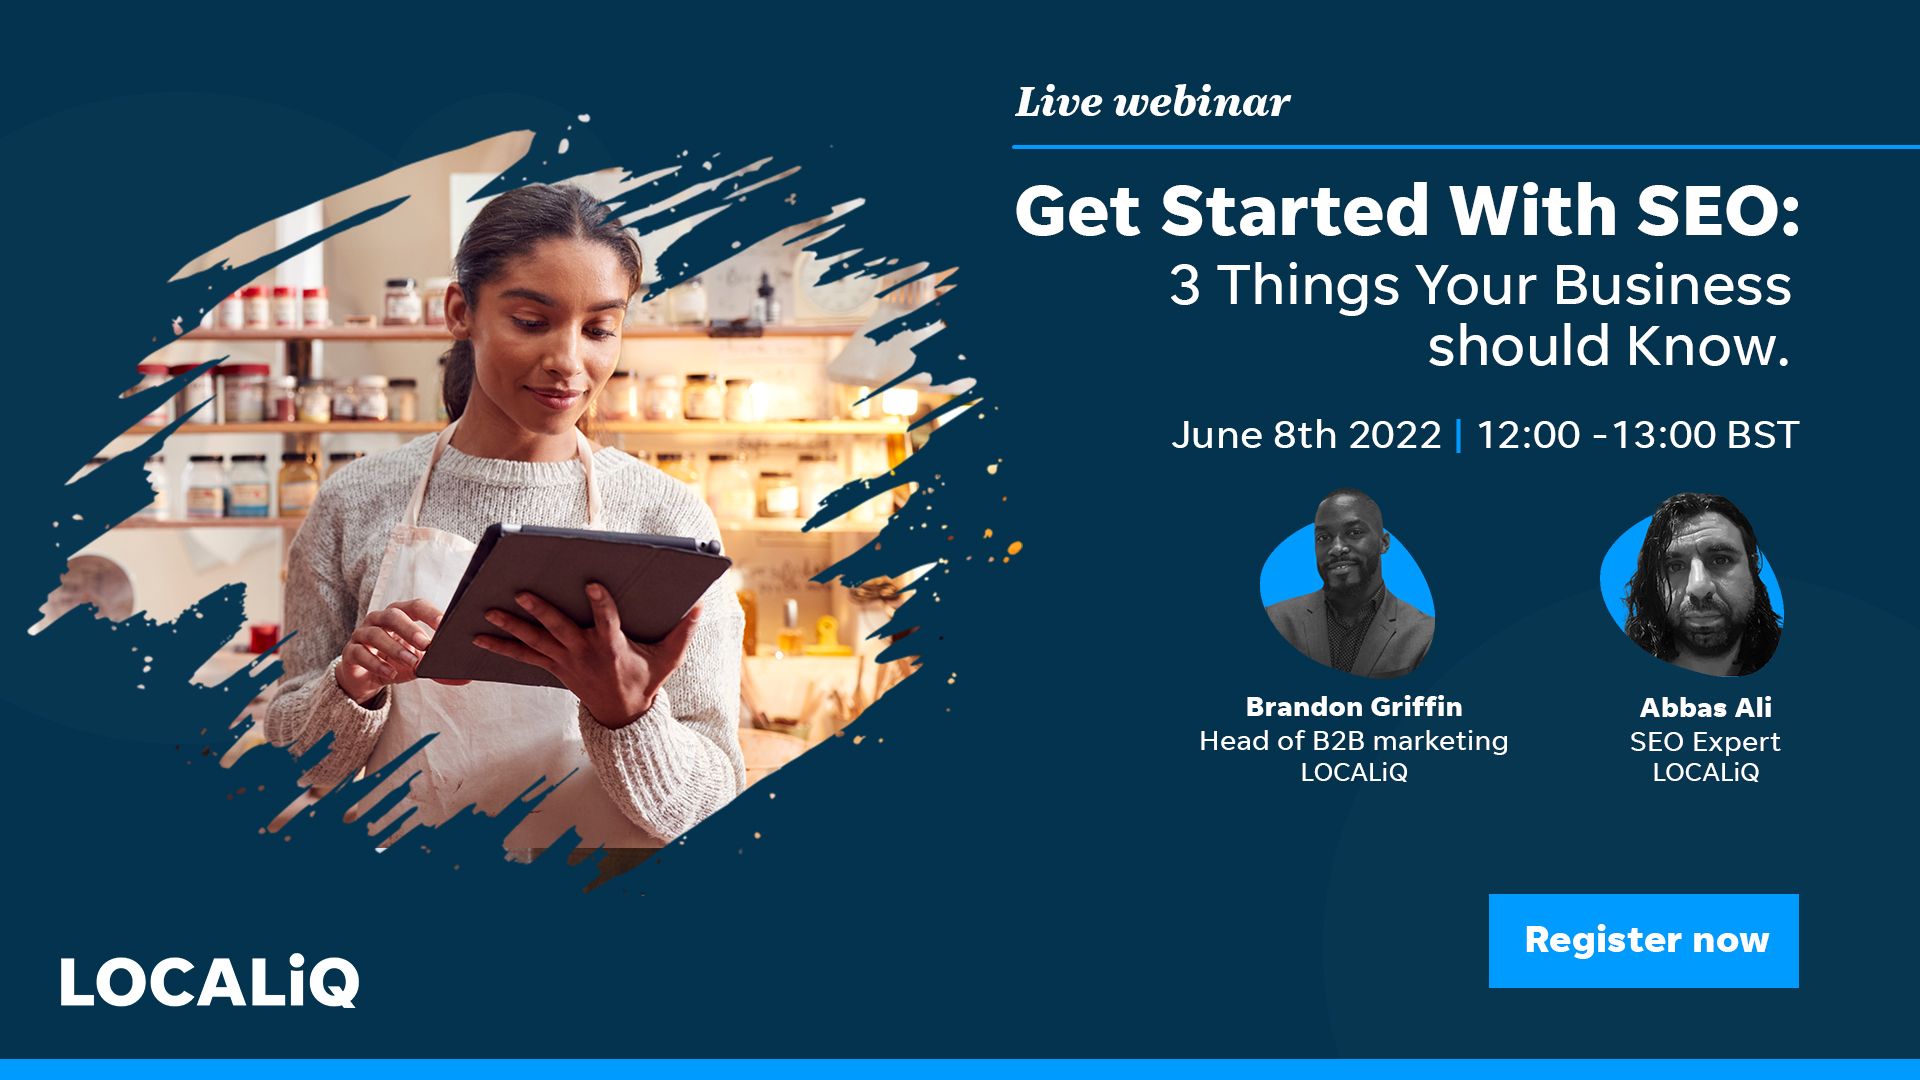 Live Webinar | Get Started With SEO Isle of Wight, Online Event